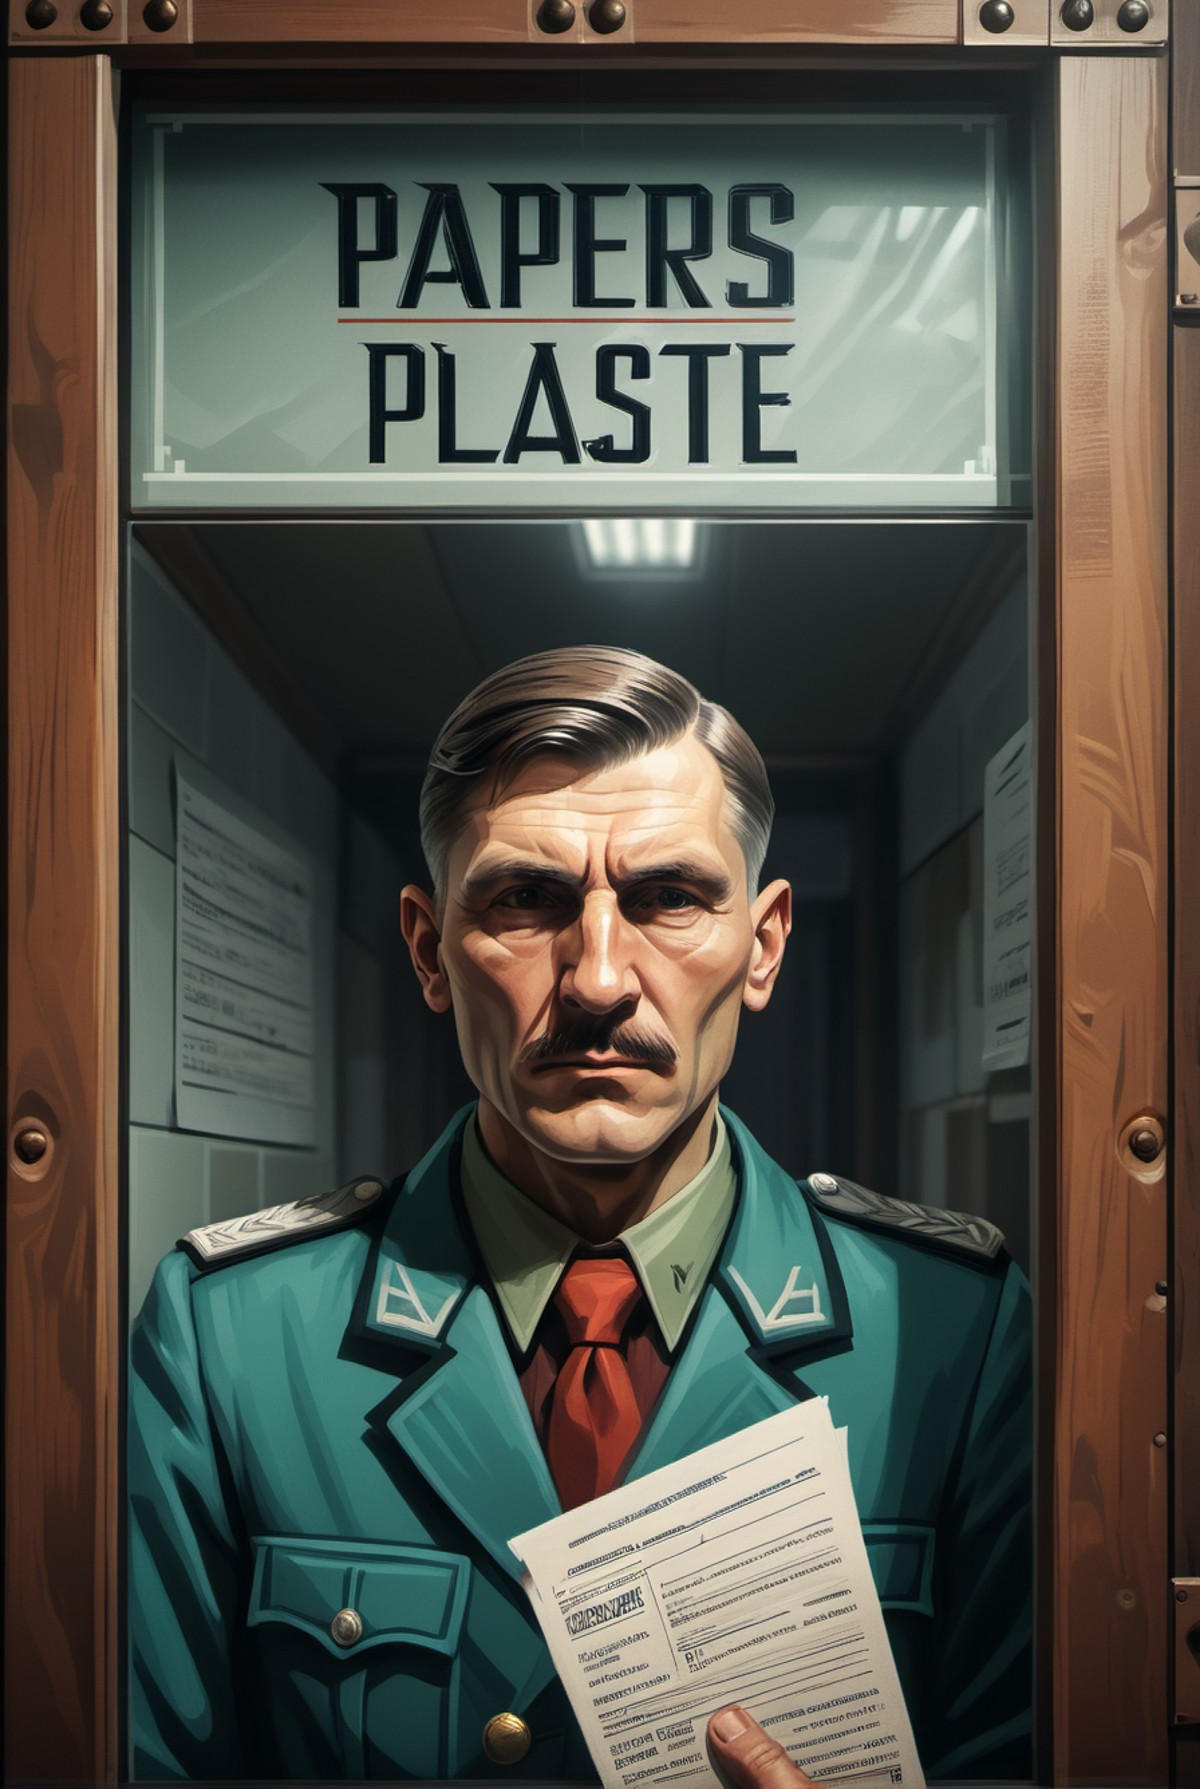 ("Papers please " text logo:1.5), <lora:Harrlogos_v1.1:1>,a bureaucratic slavic man asking for papers in a secure cabin be...